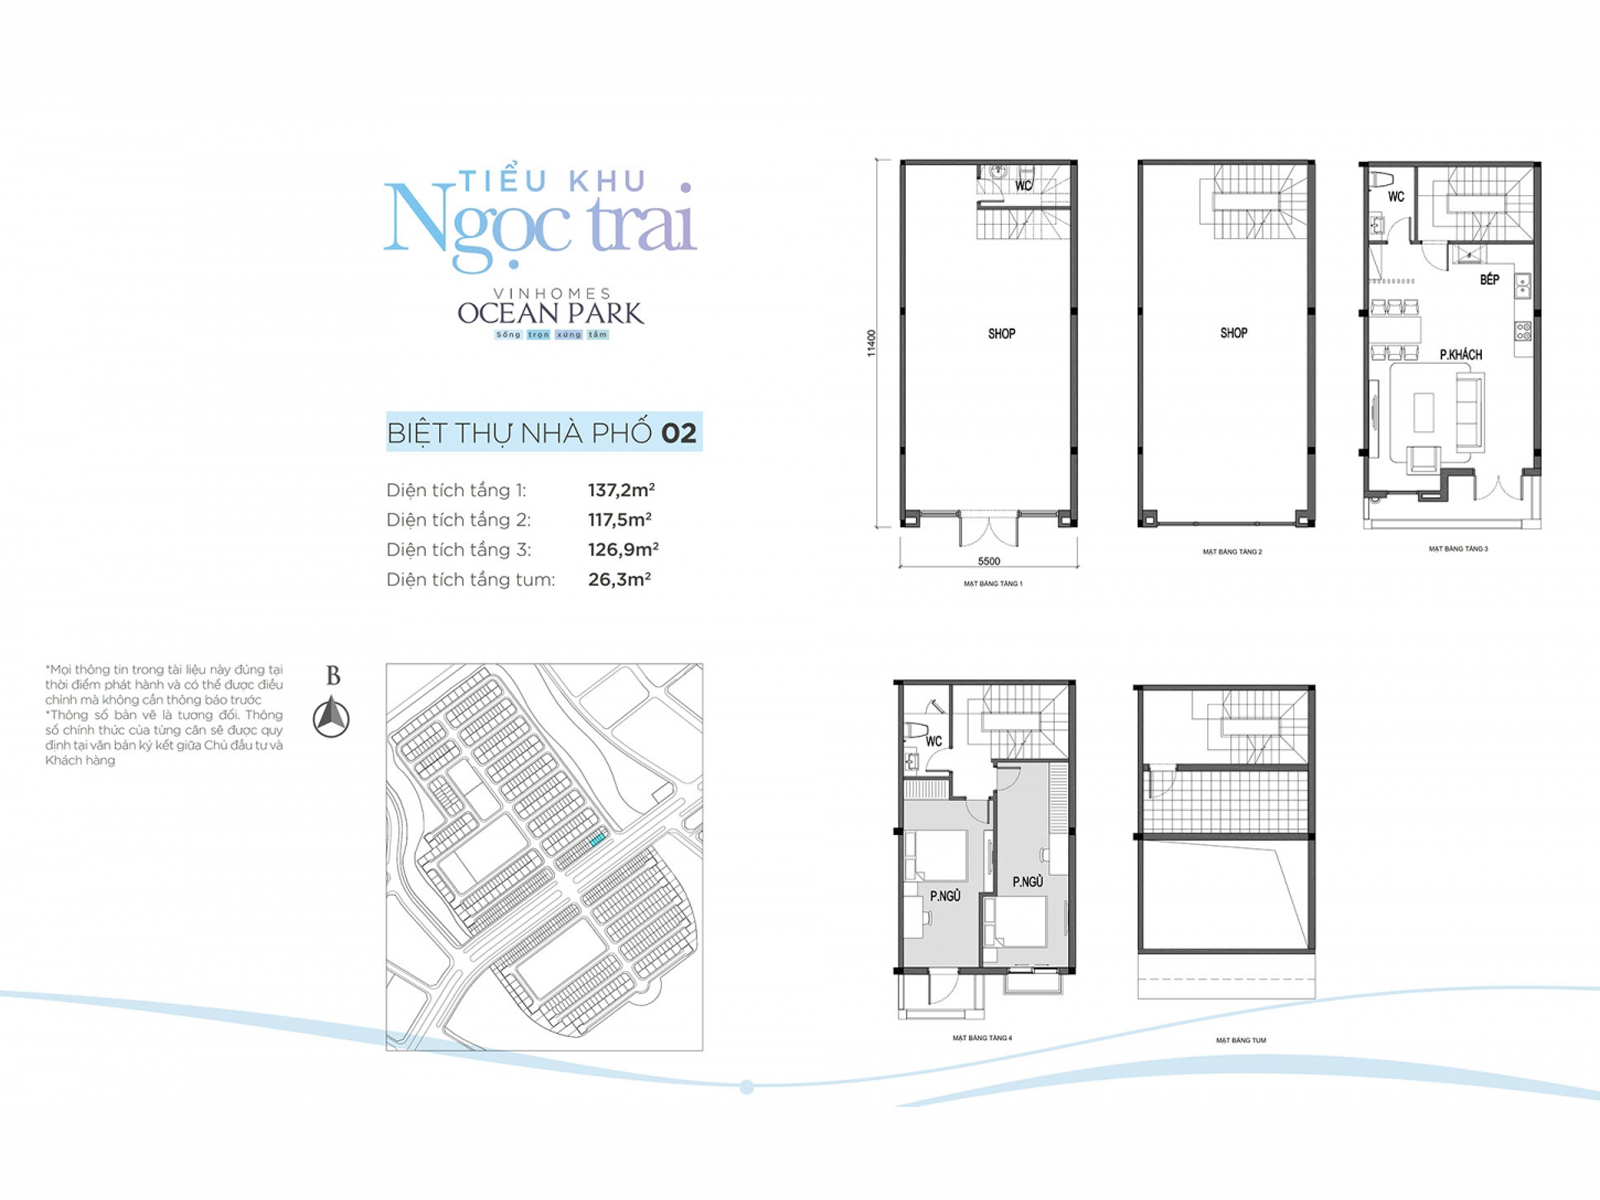 Floor plan of Shophouse for sale in Ngoc Trai subdivision